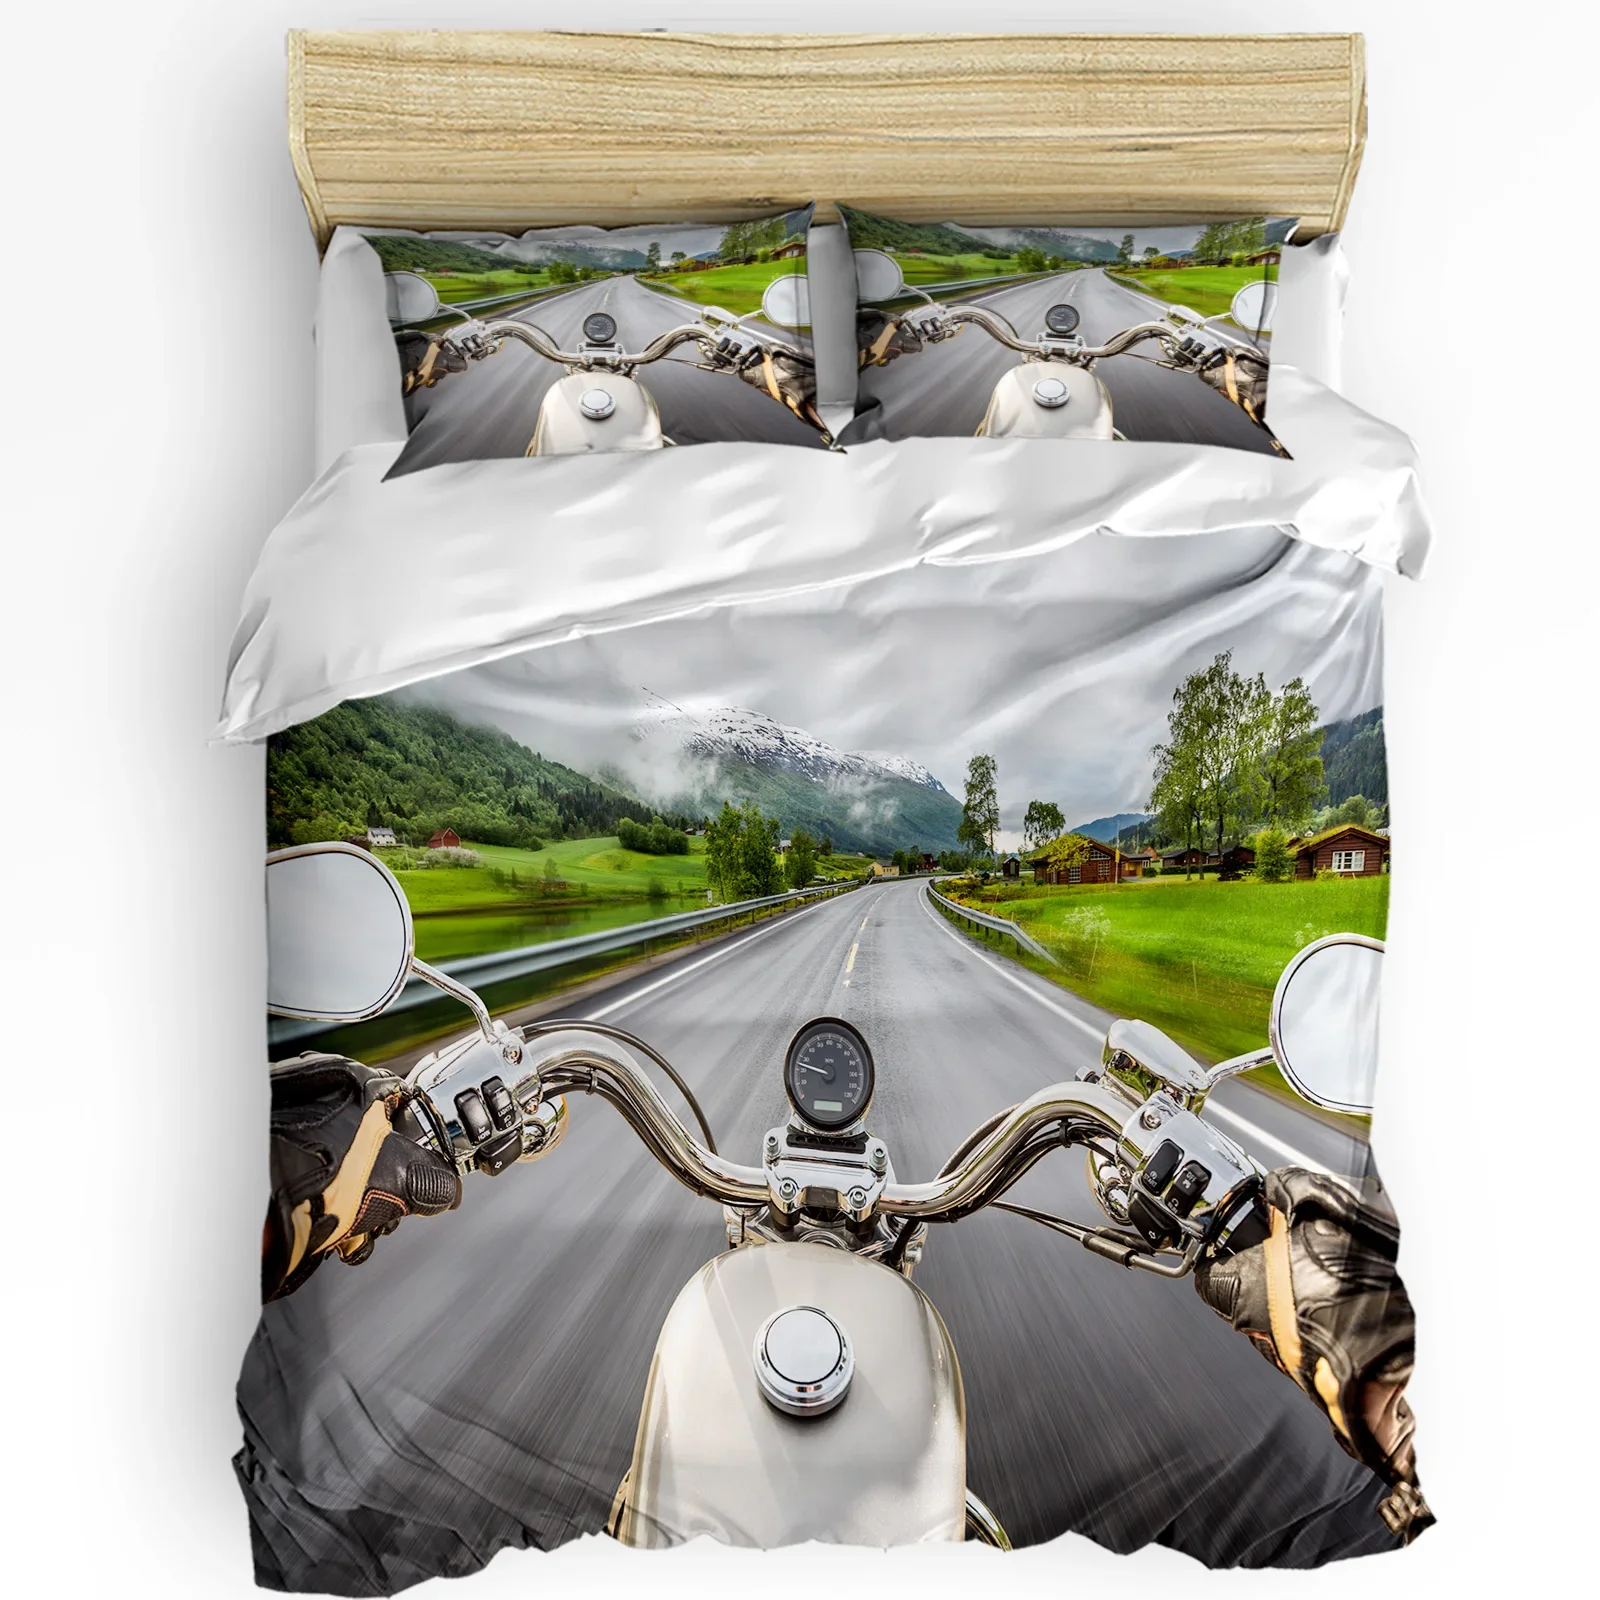 

3pcs Bedding Set Motorcycle Competition Home Textile Duvet Cover Pillow Case Boy Kid Teen Girl Bedding Covers Set